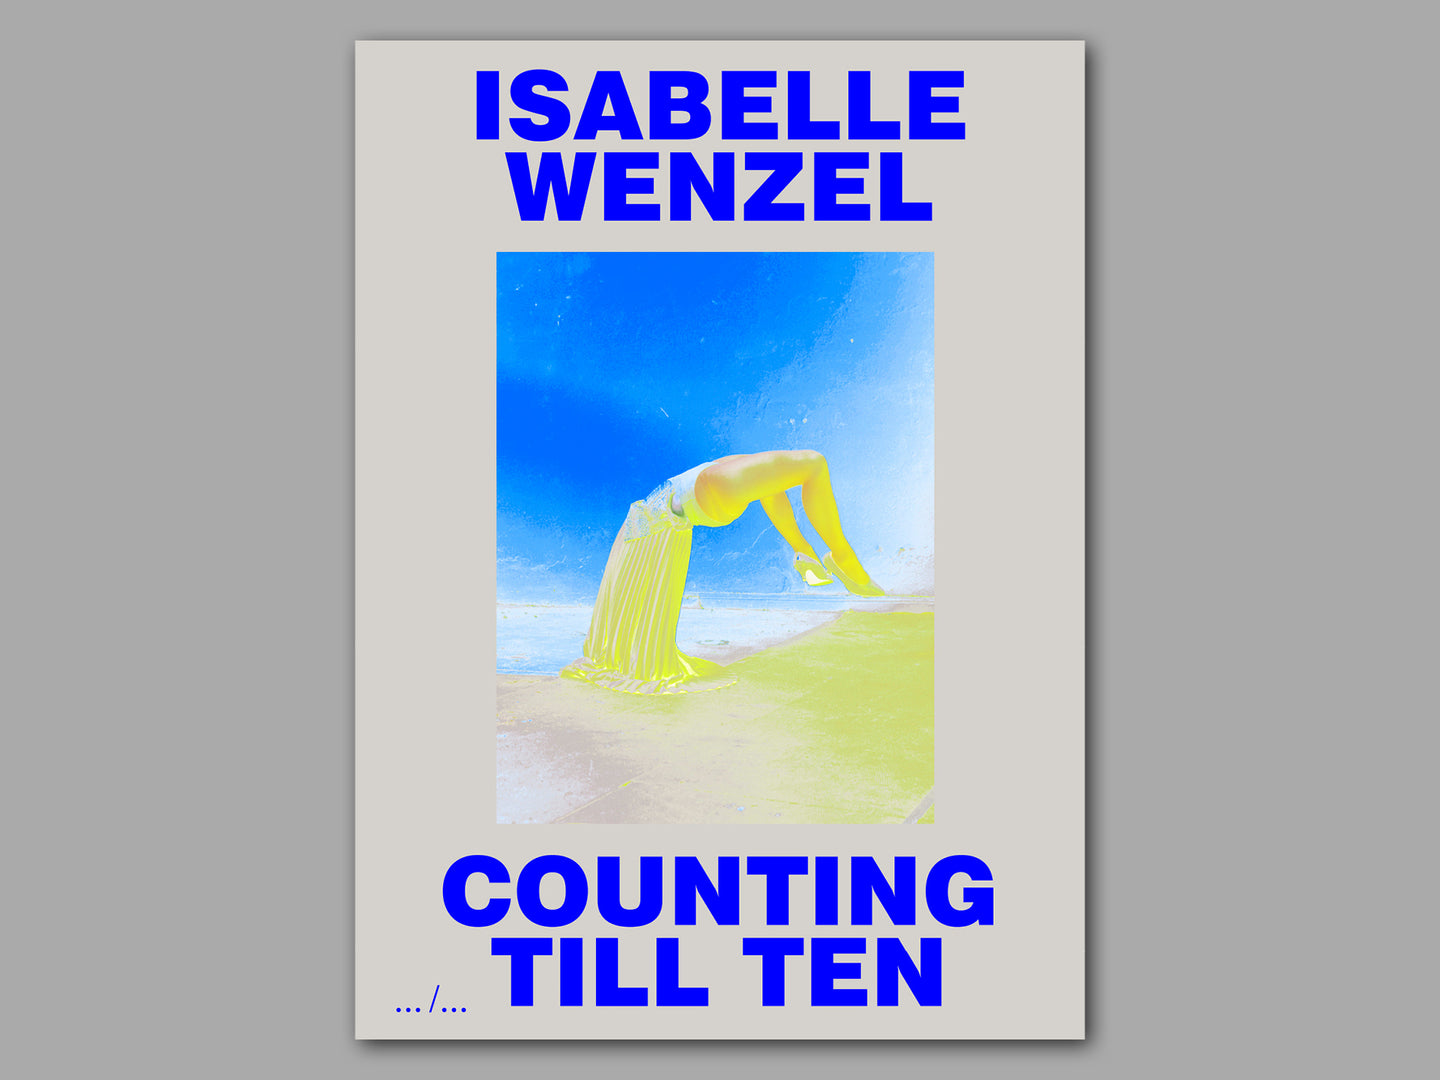 Counting Till Ten by Isabelle Wenzel